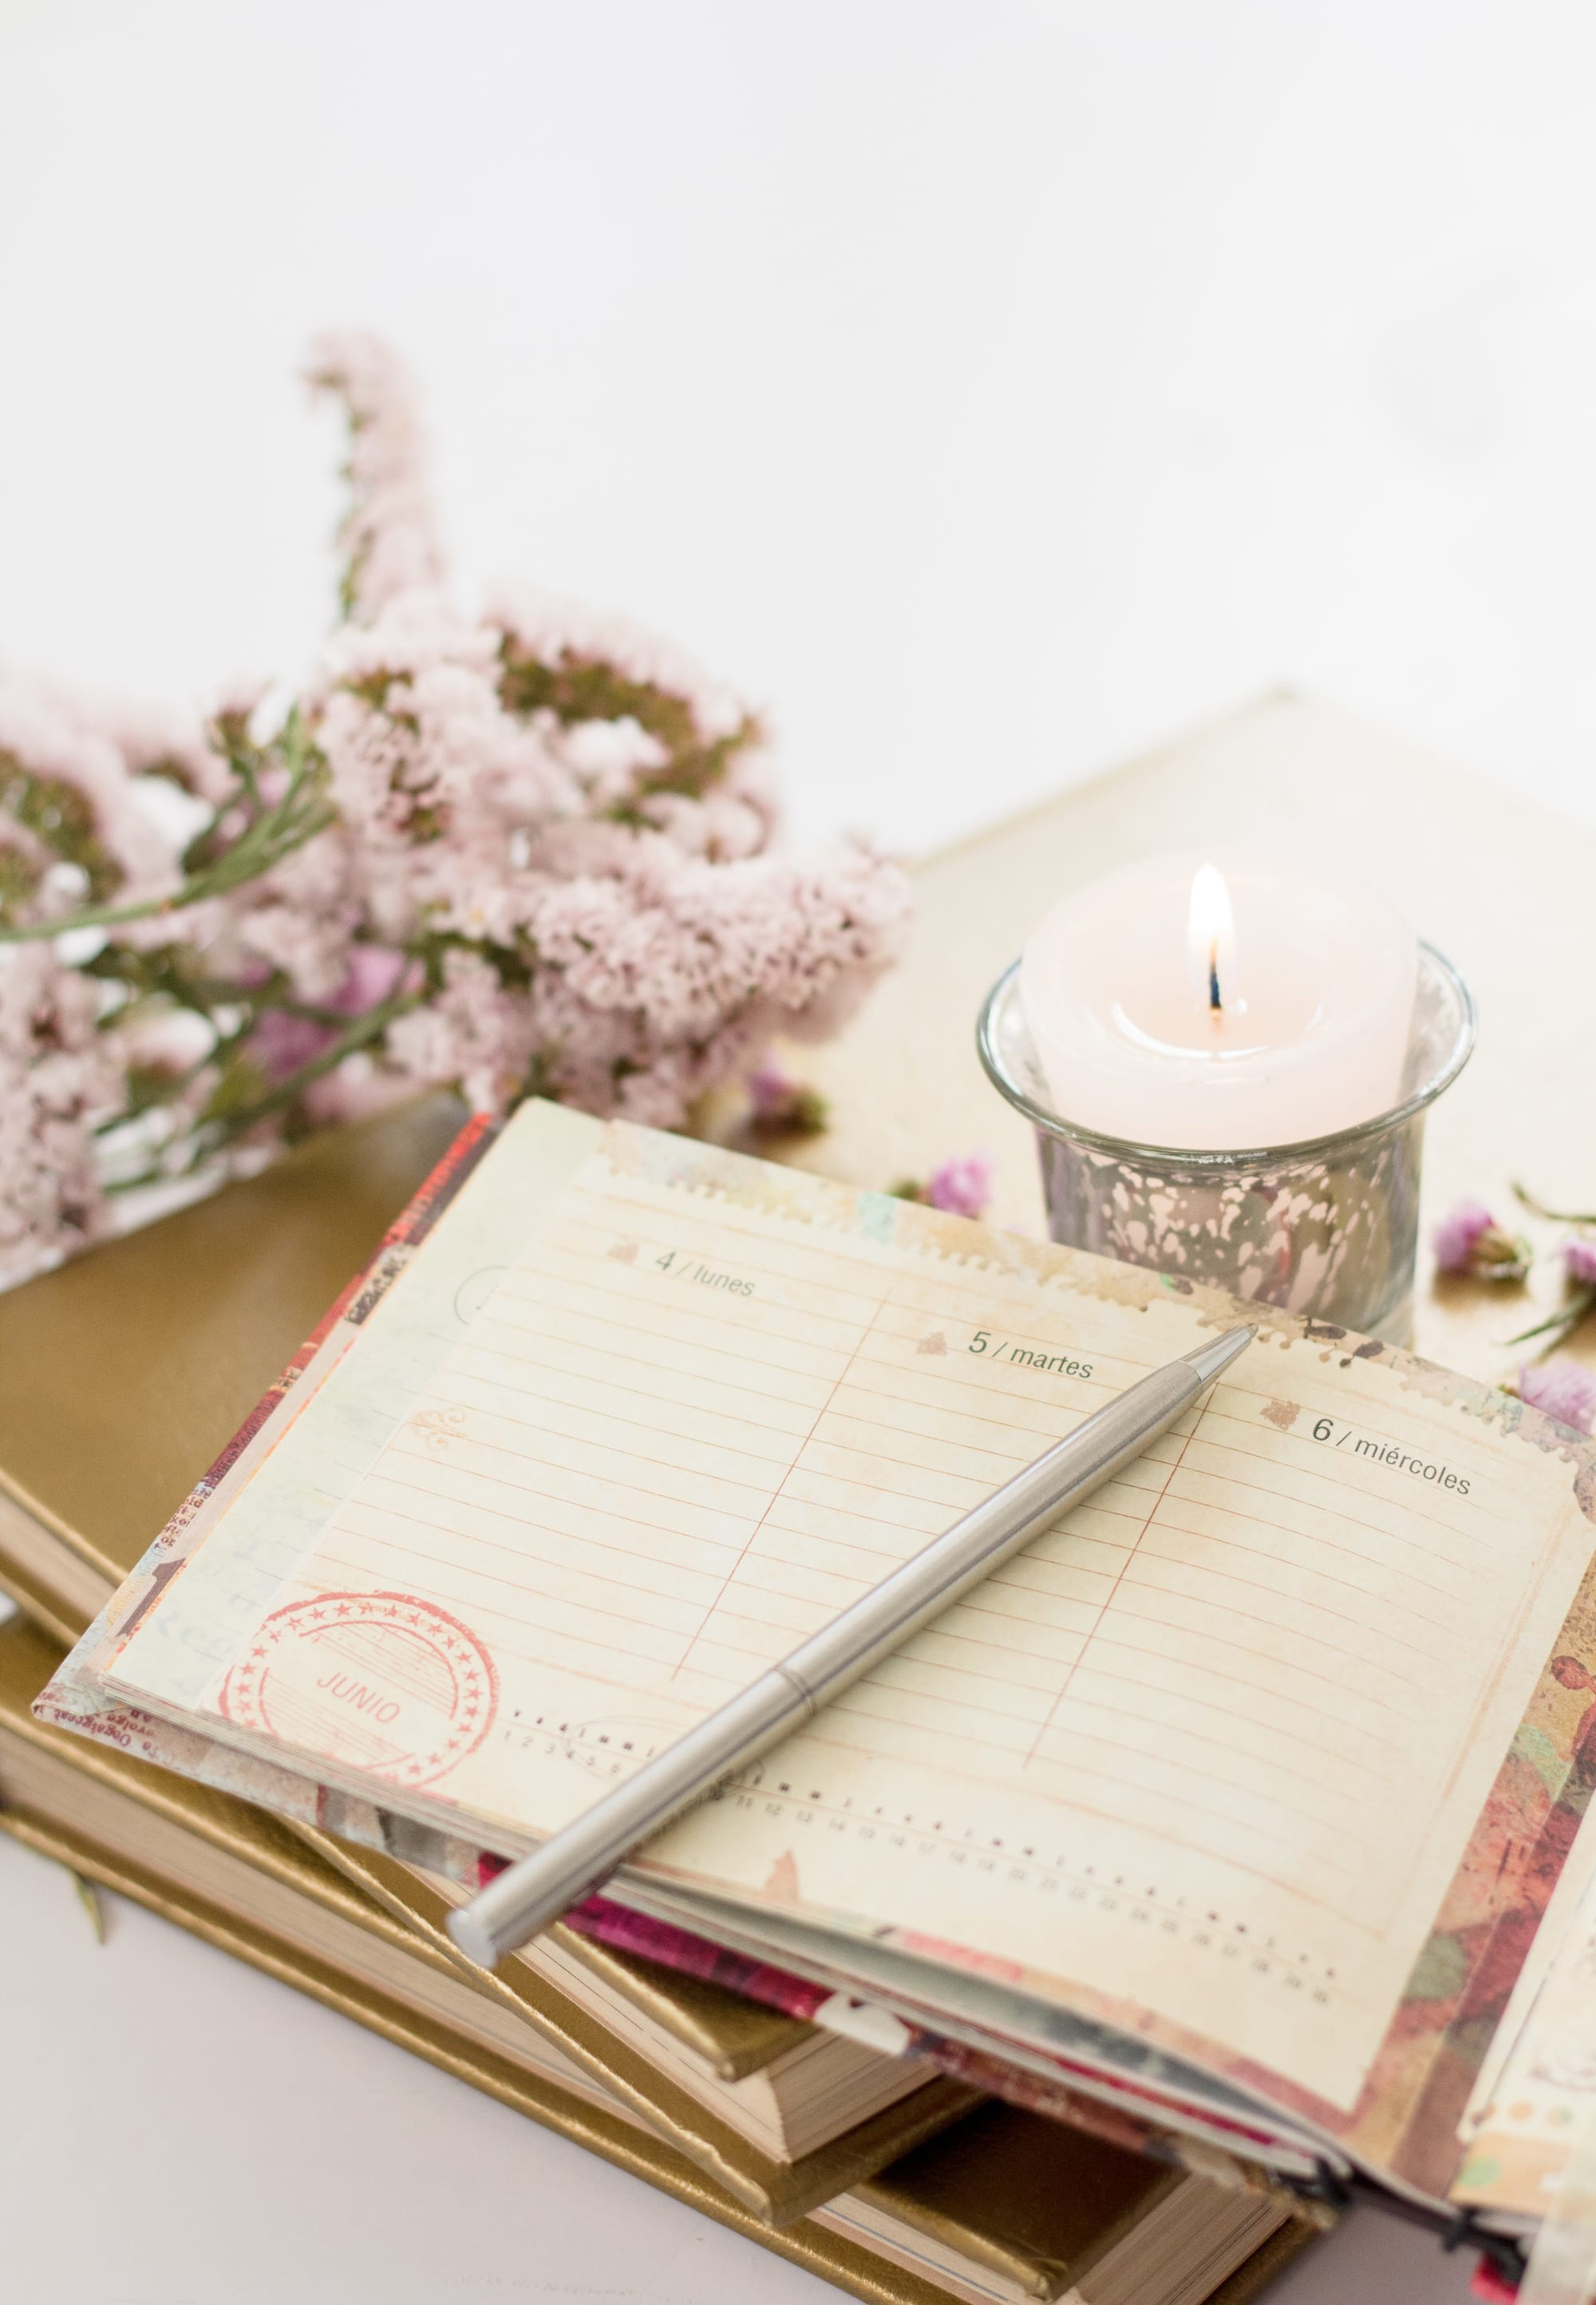 A journal, flowers and candle